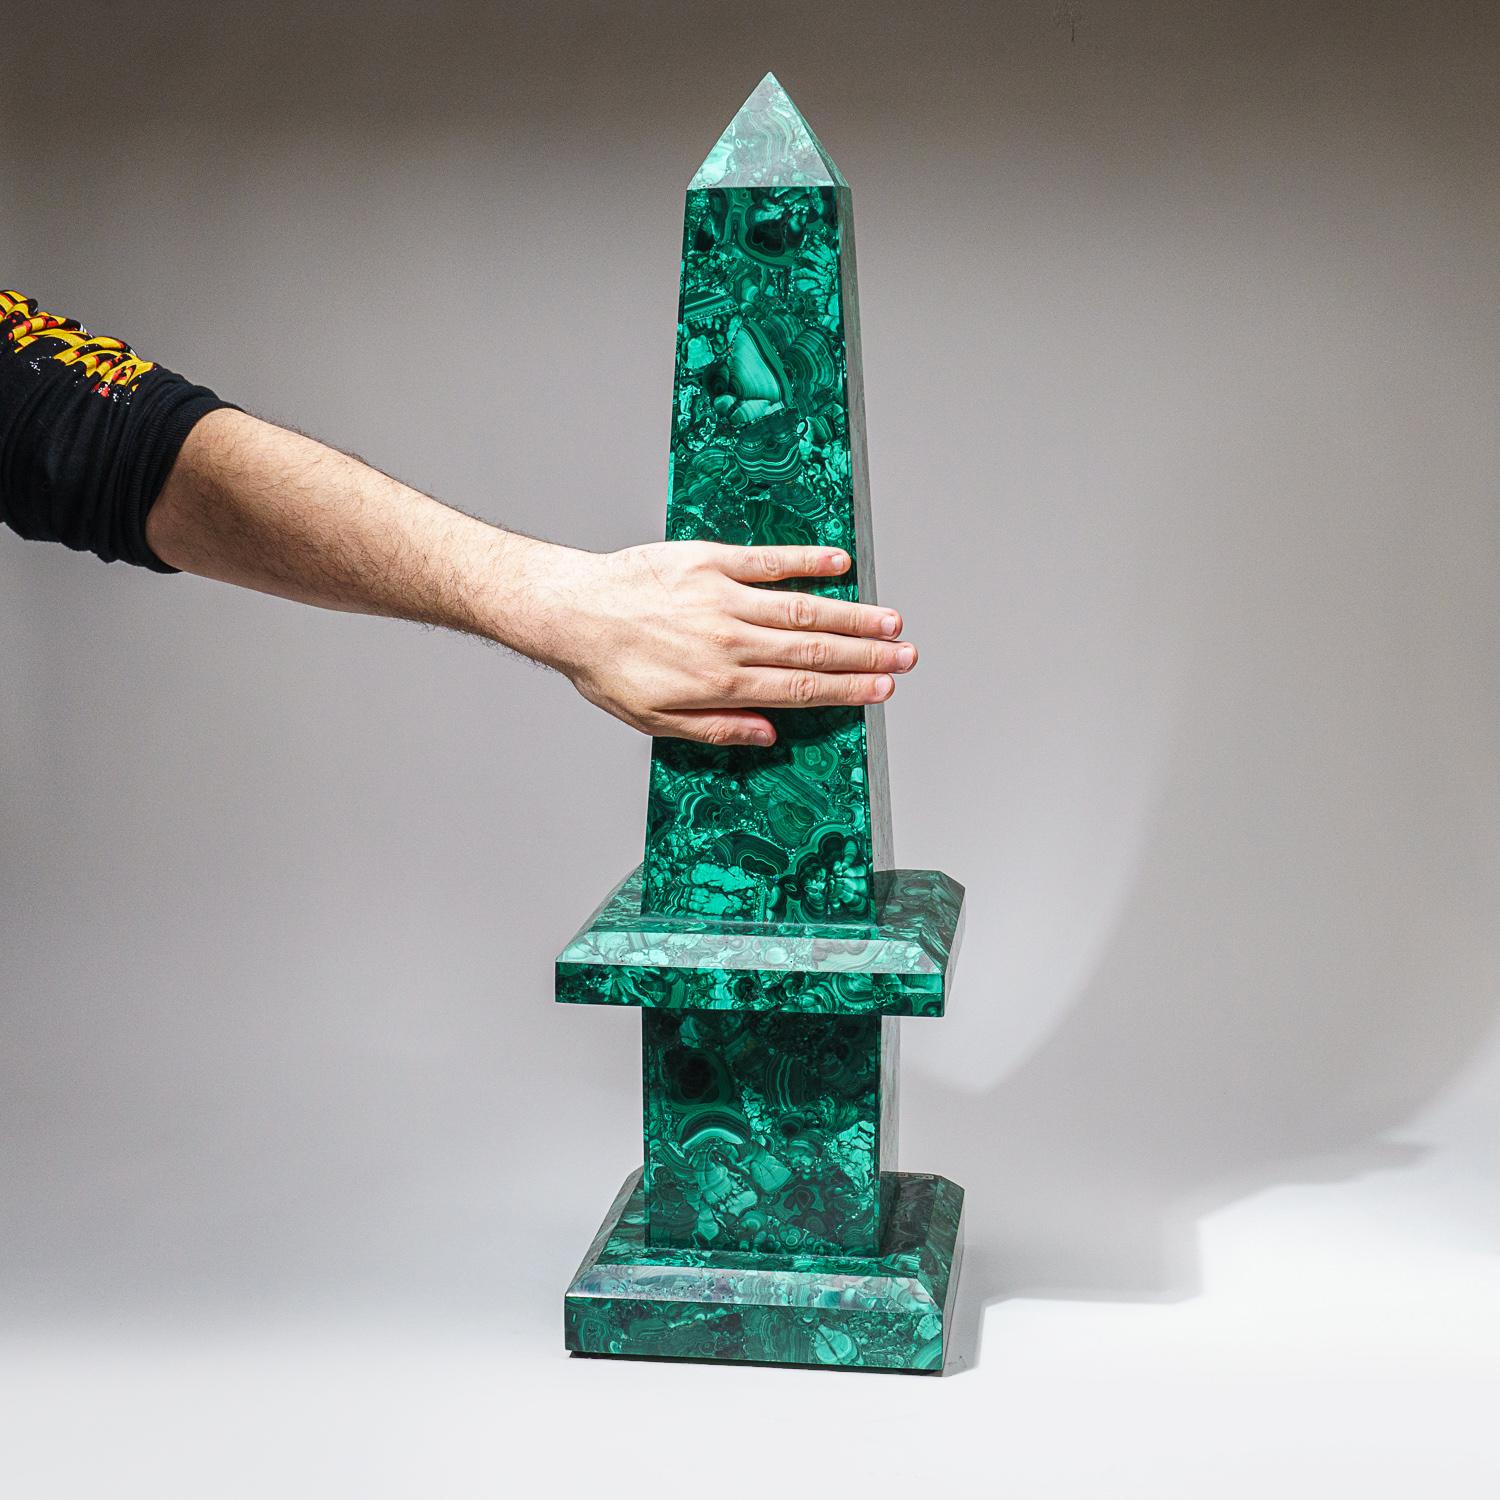 Handcrafted to perfection, this obelisk was made from AAA quality natural Malachite. Malachite is the essence of joy and is known as the 